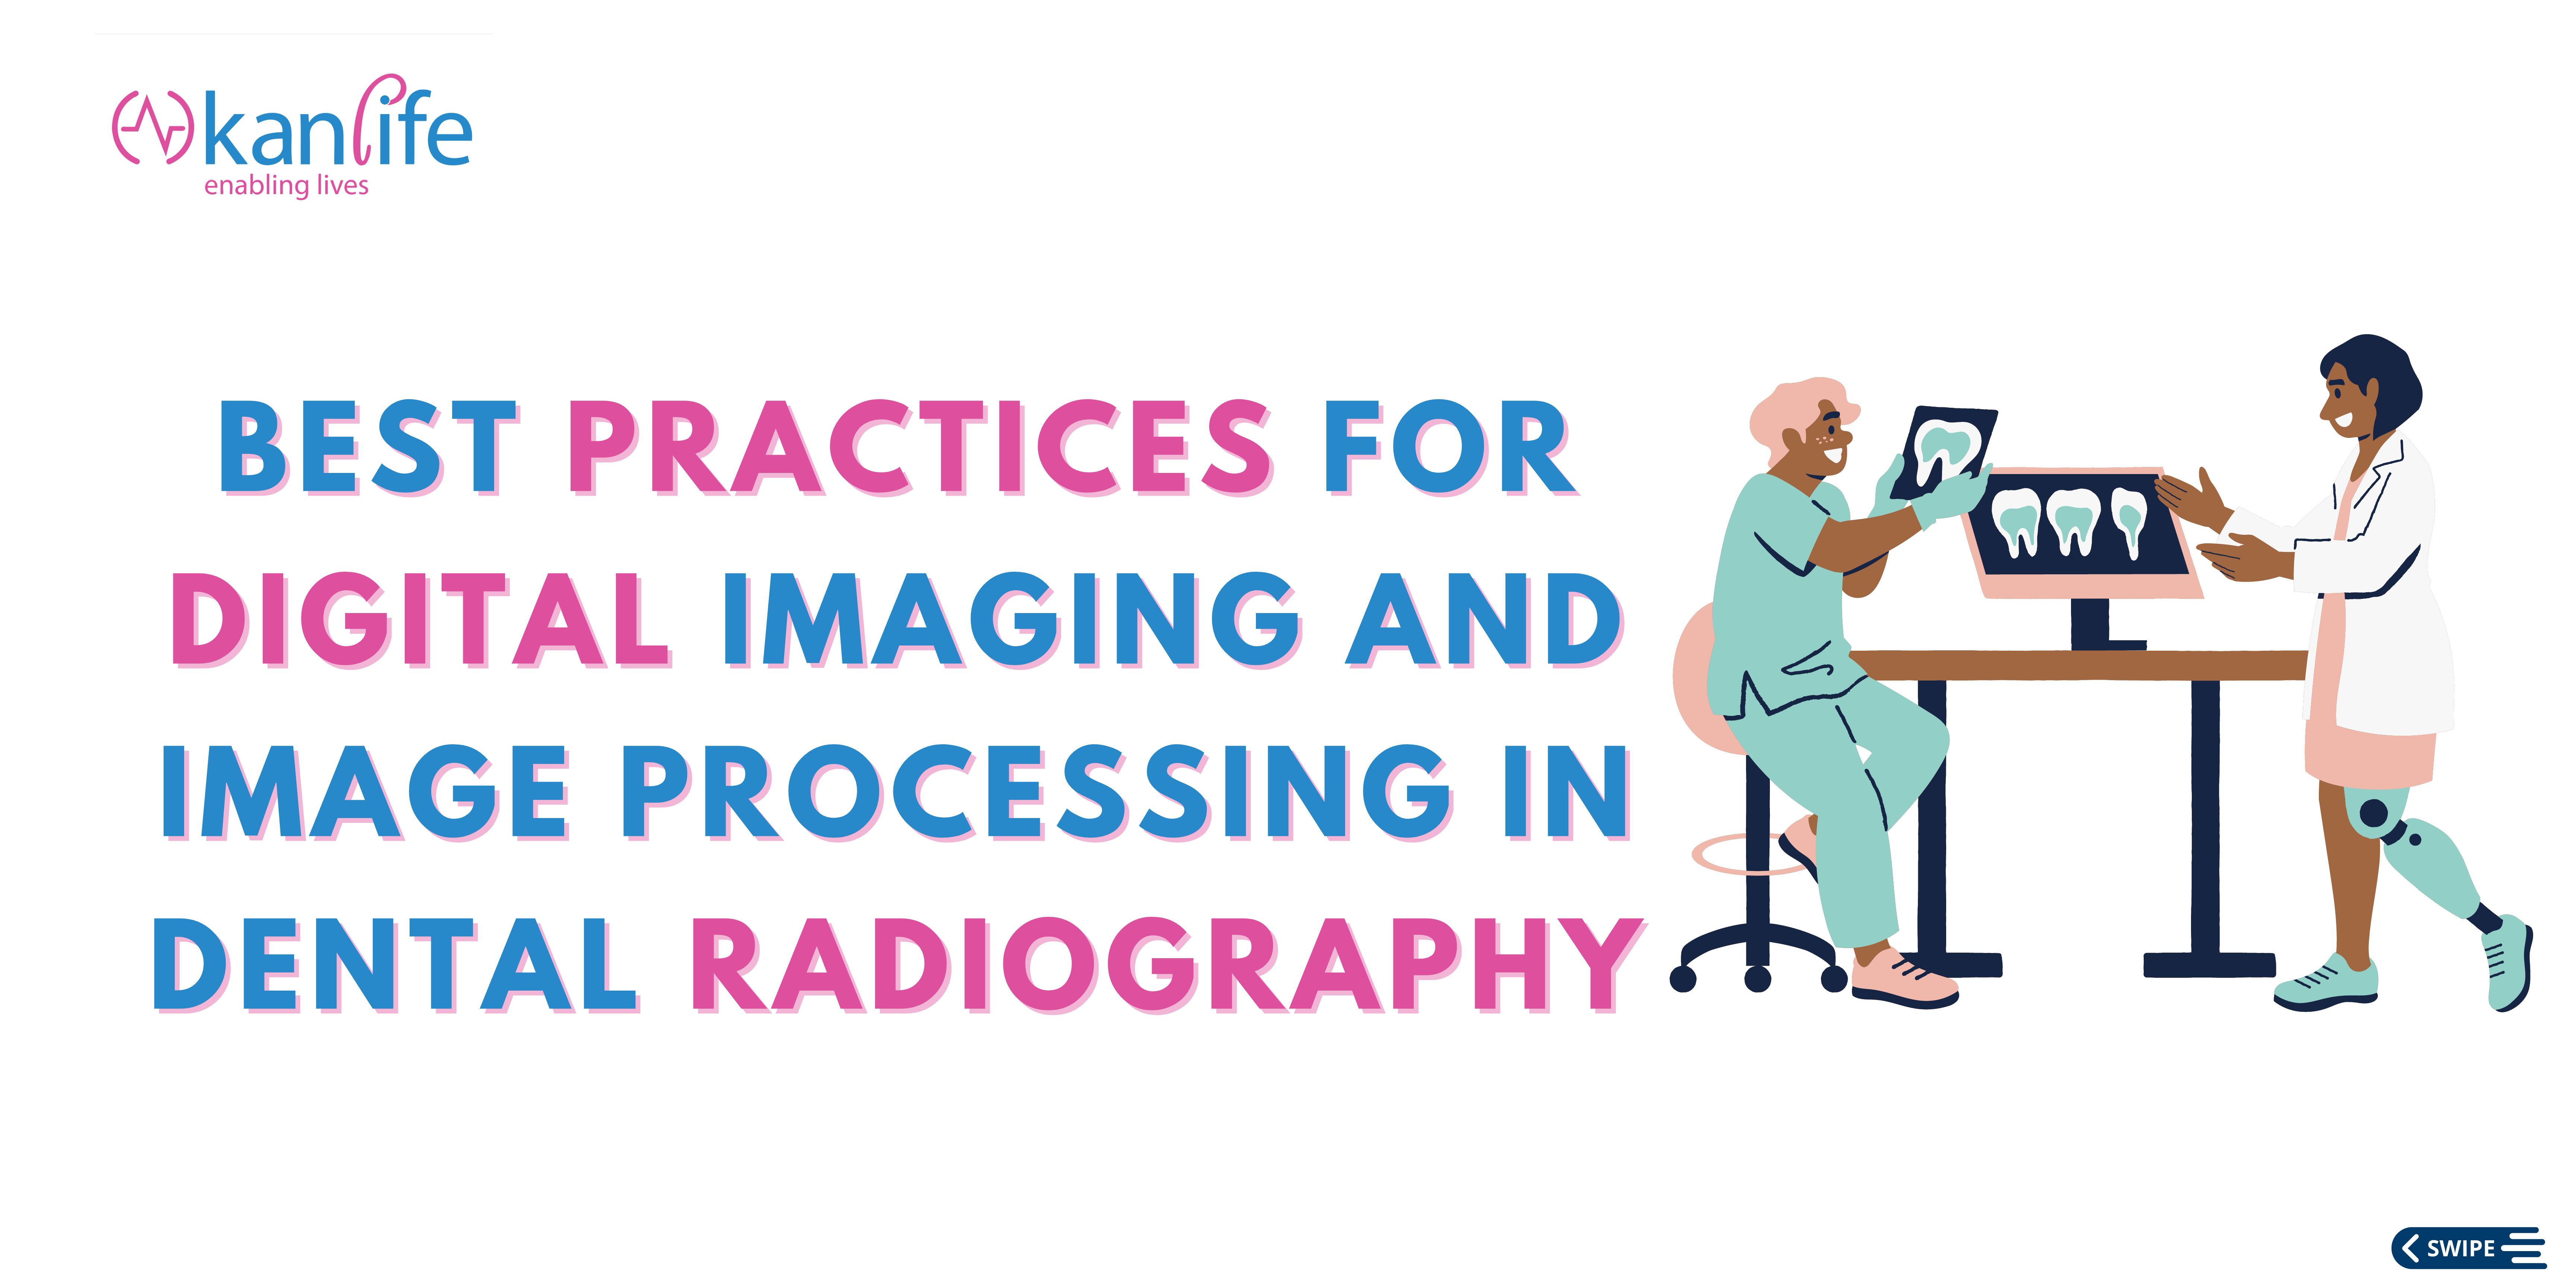 What are the best practices for digital imaging and image processing in dental radiography?